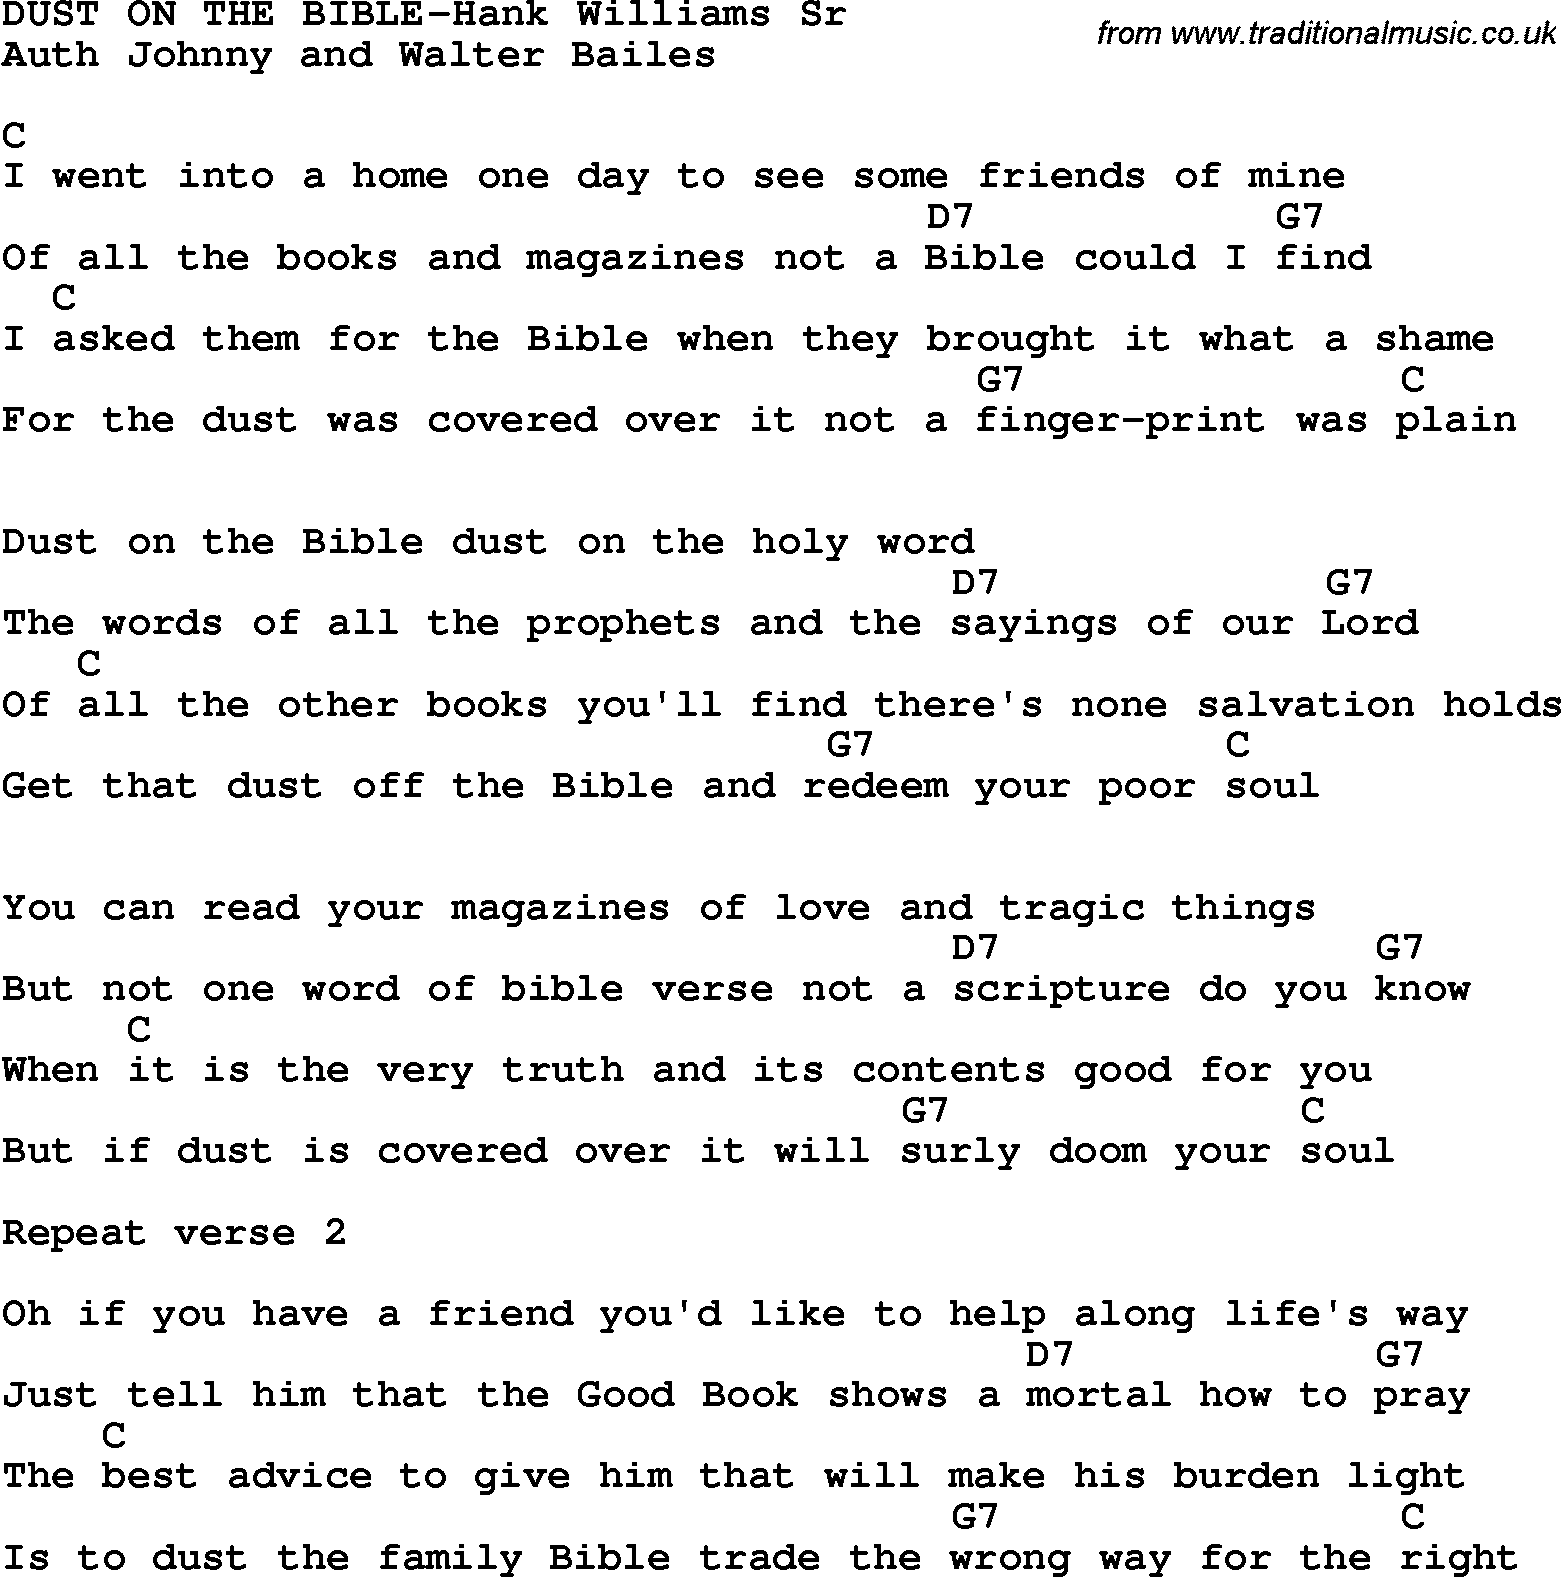 Country, Southern and Bluegrass Gospel Song DUST ON THE BIBLE-Hank Williams Sr lyrics and chords